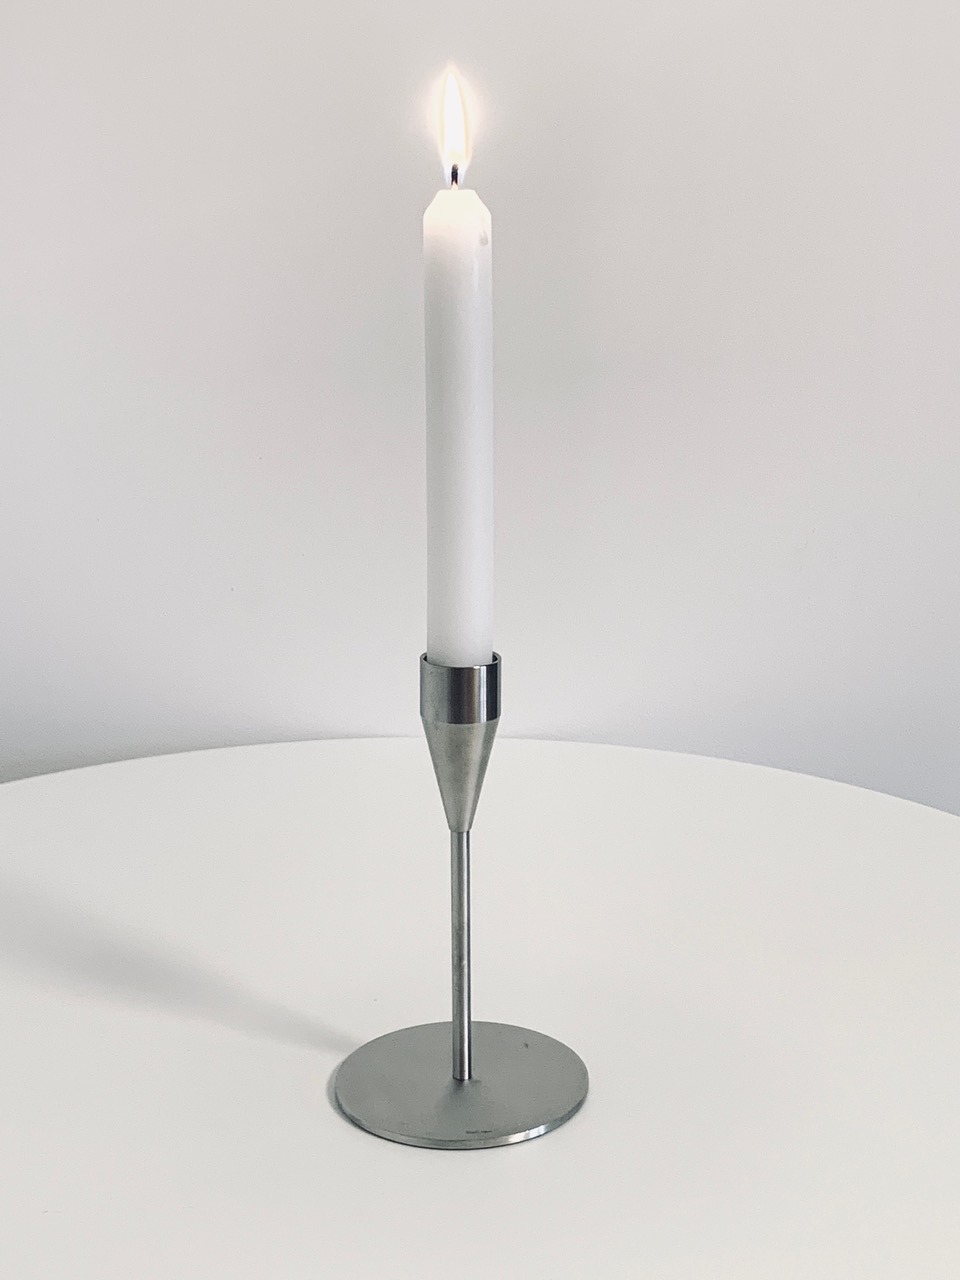 Image of the Piet Hein candle holder Mars offered in this advertisement